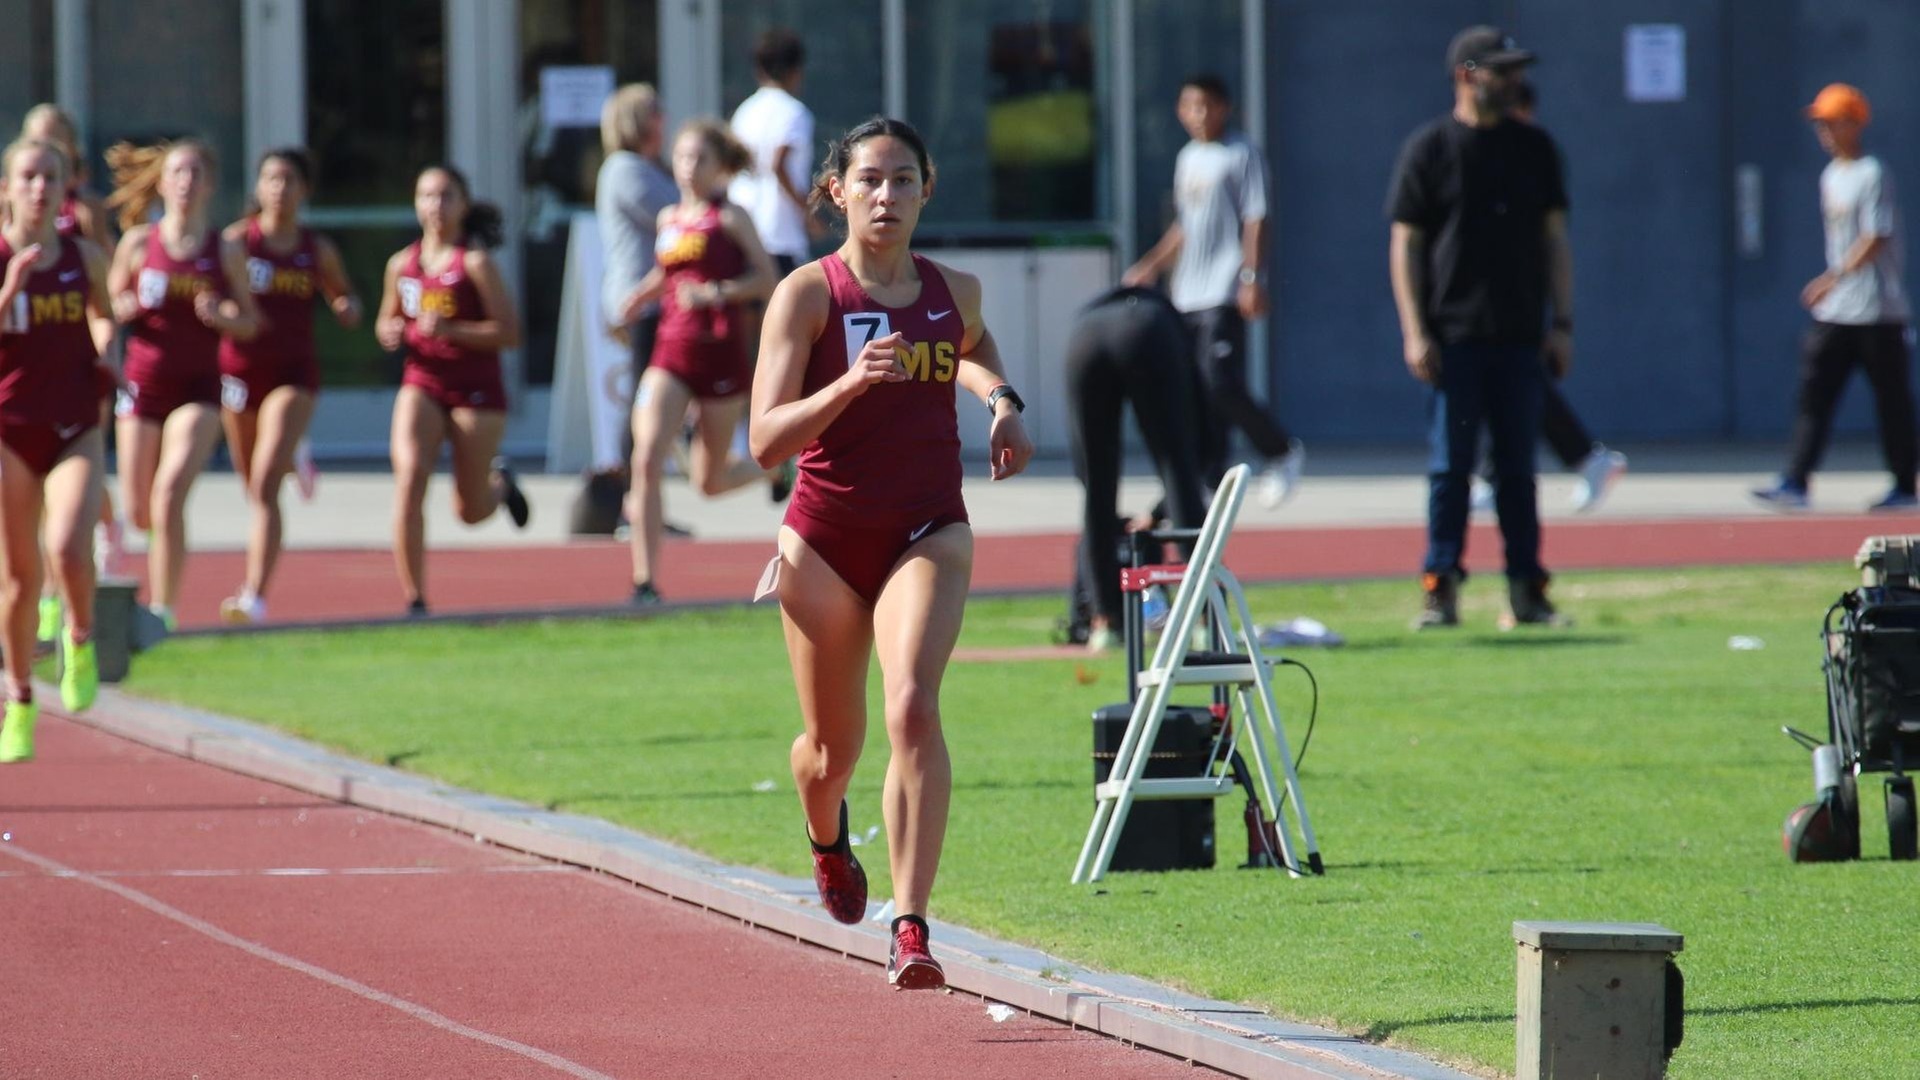 Natalie Bitetti ran the fastest 3K in CMS history by two-tenths of a second